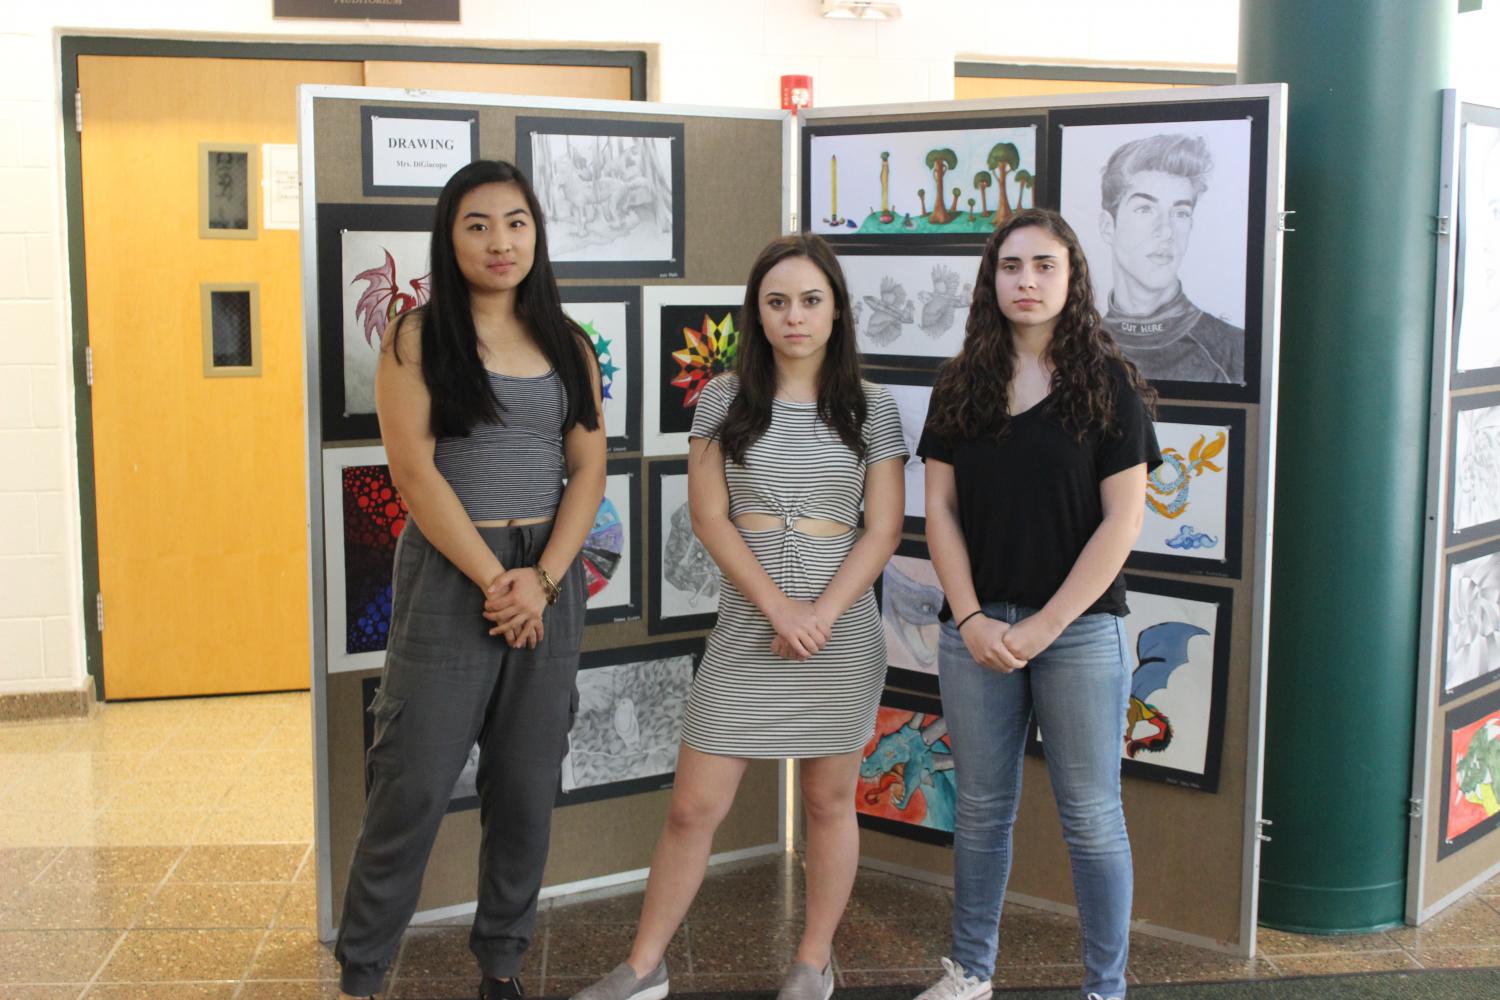 PV seniors and DECA club members Olivia Wang, Mary Kate Viceconte, and Eva Rosini pose together. Many DECA members recently won awards at several competitions.